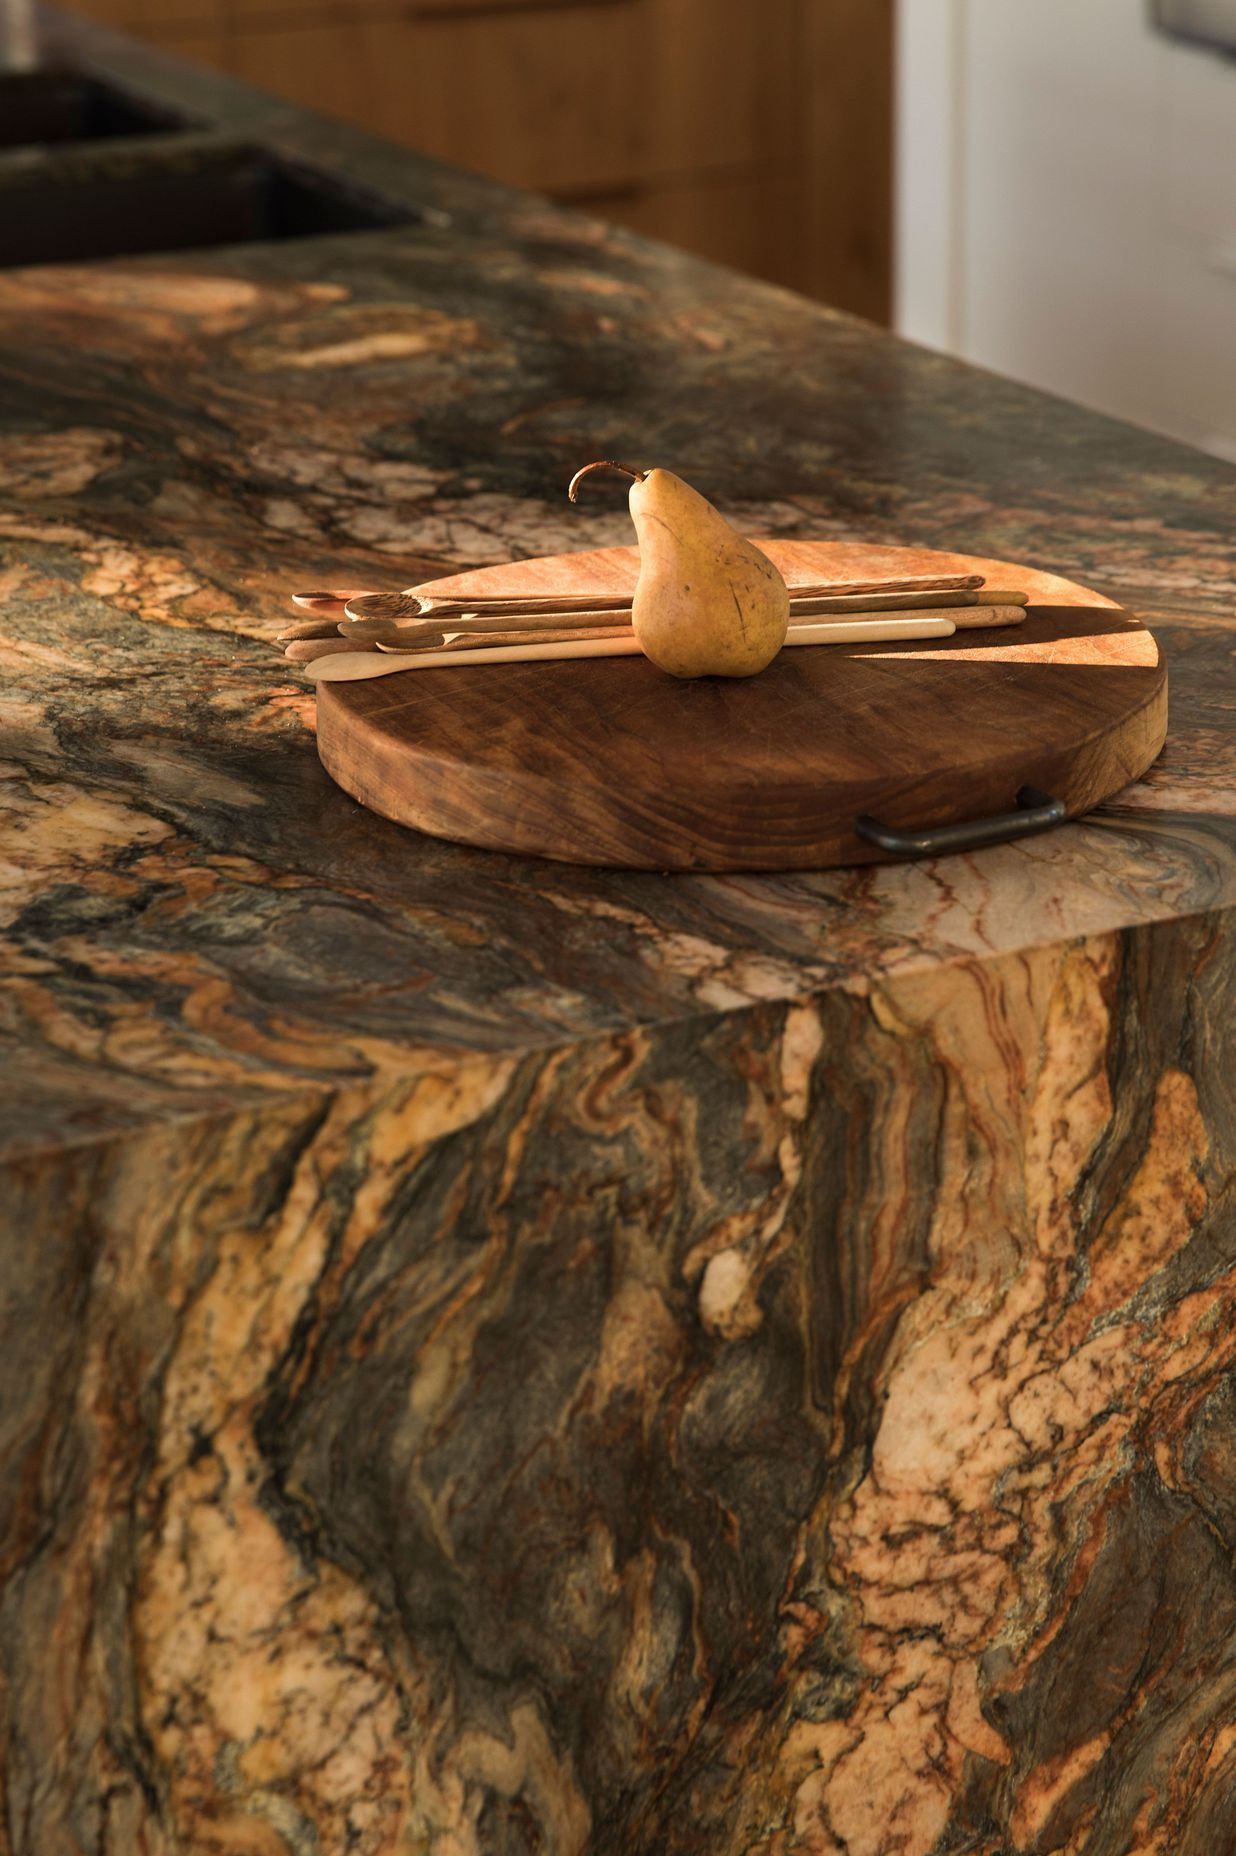 Rich warm tones and patterns can be seen in the quartzite stone kitchen island.